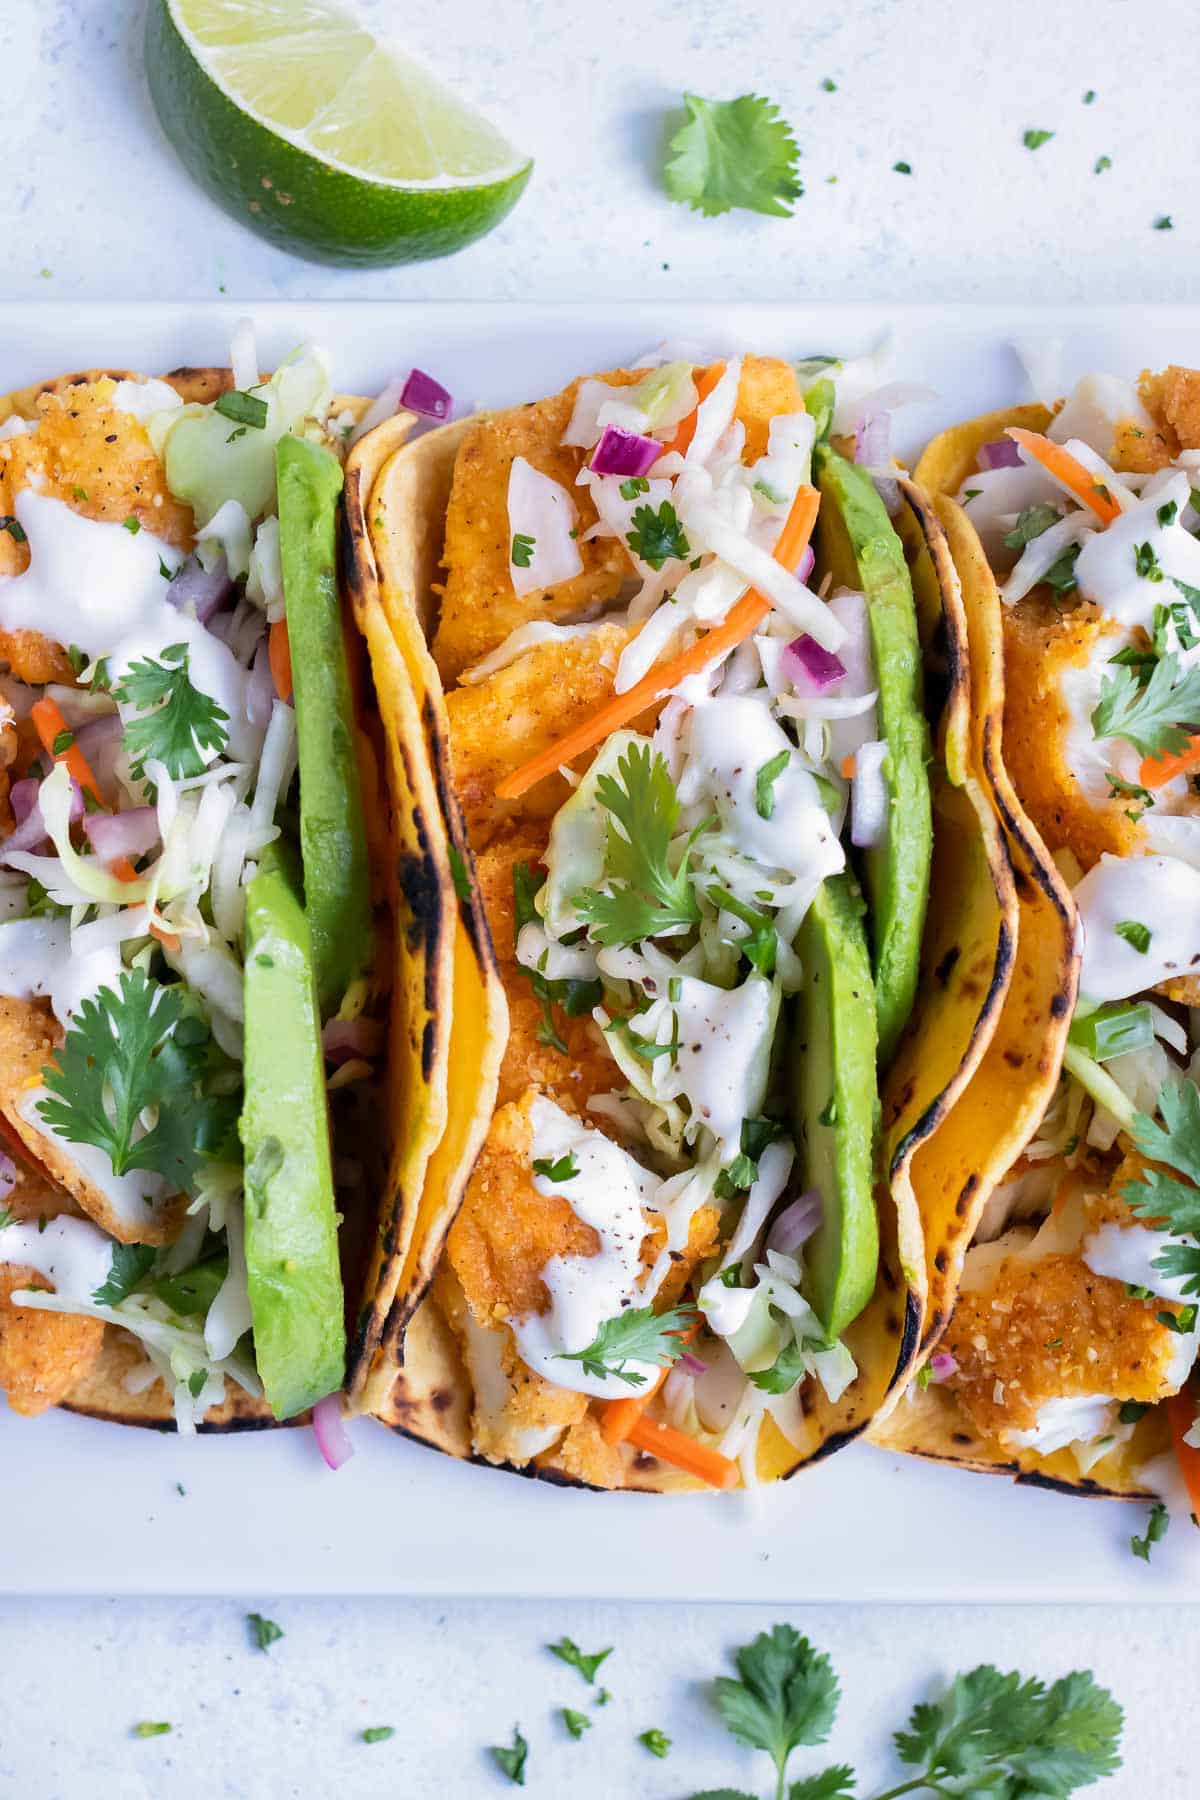 Three fish tacos are served side by side on a white plate for dinner.